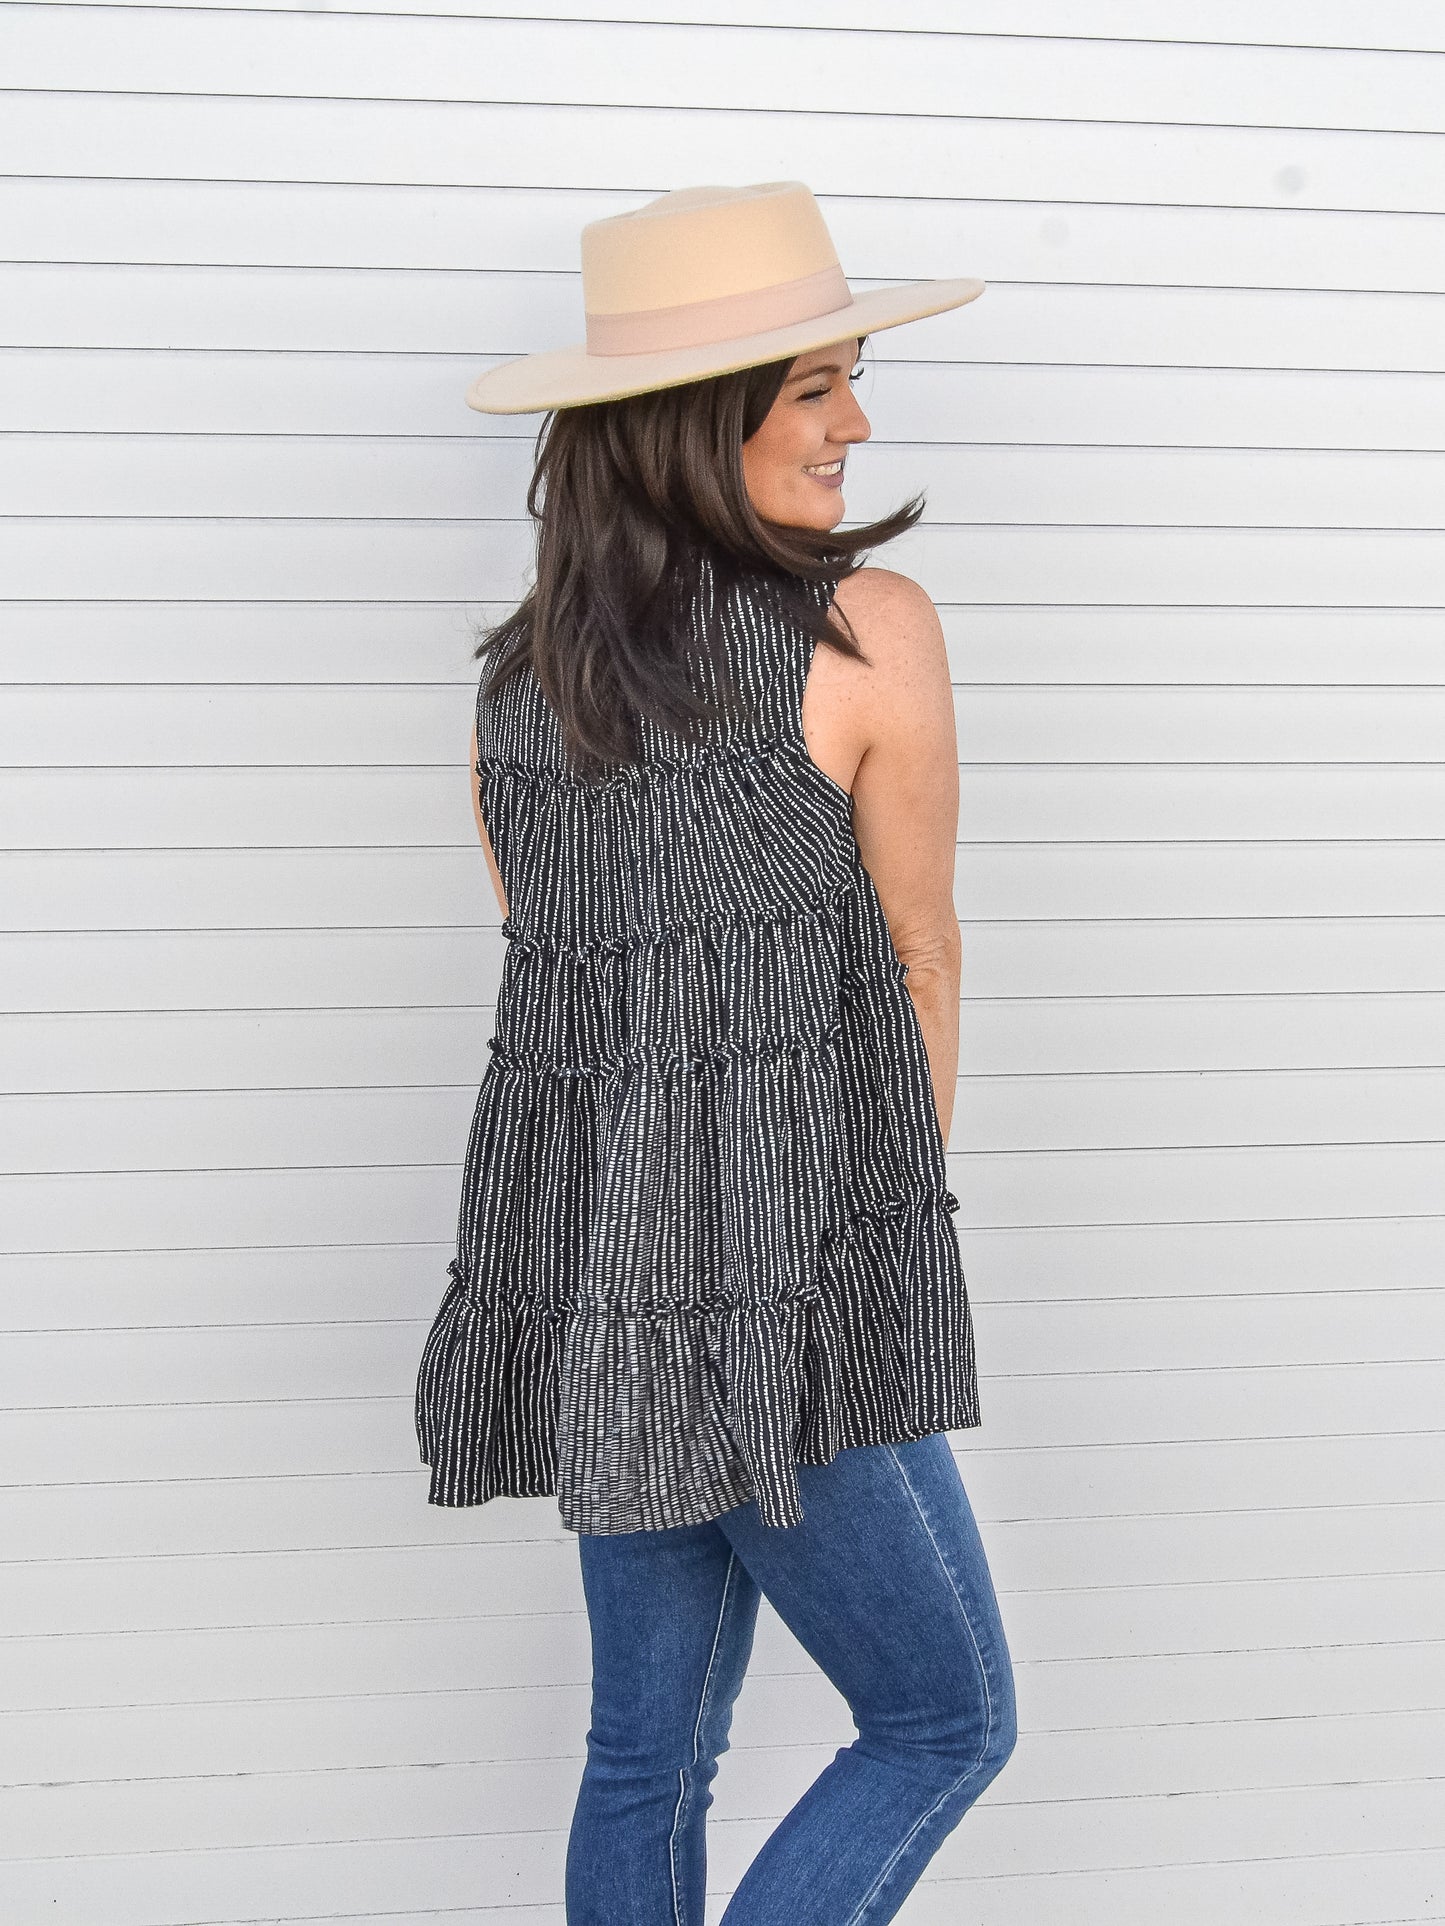 Back view of tiered sleeveless top.